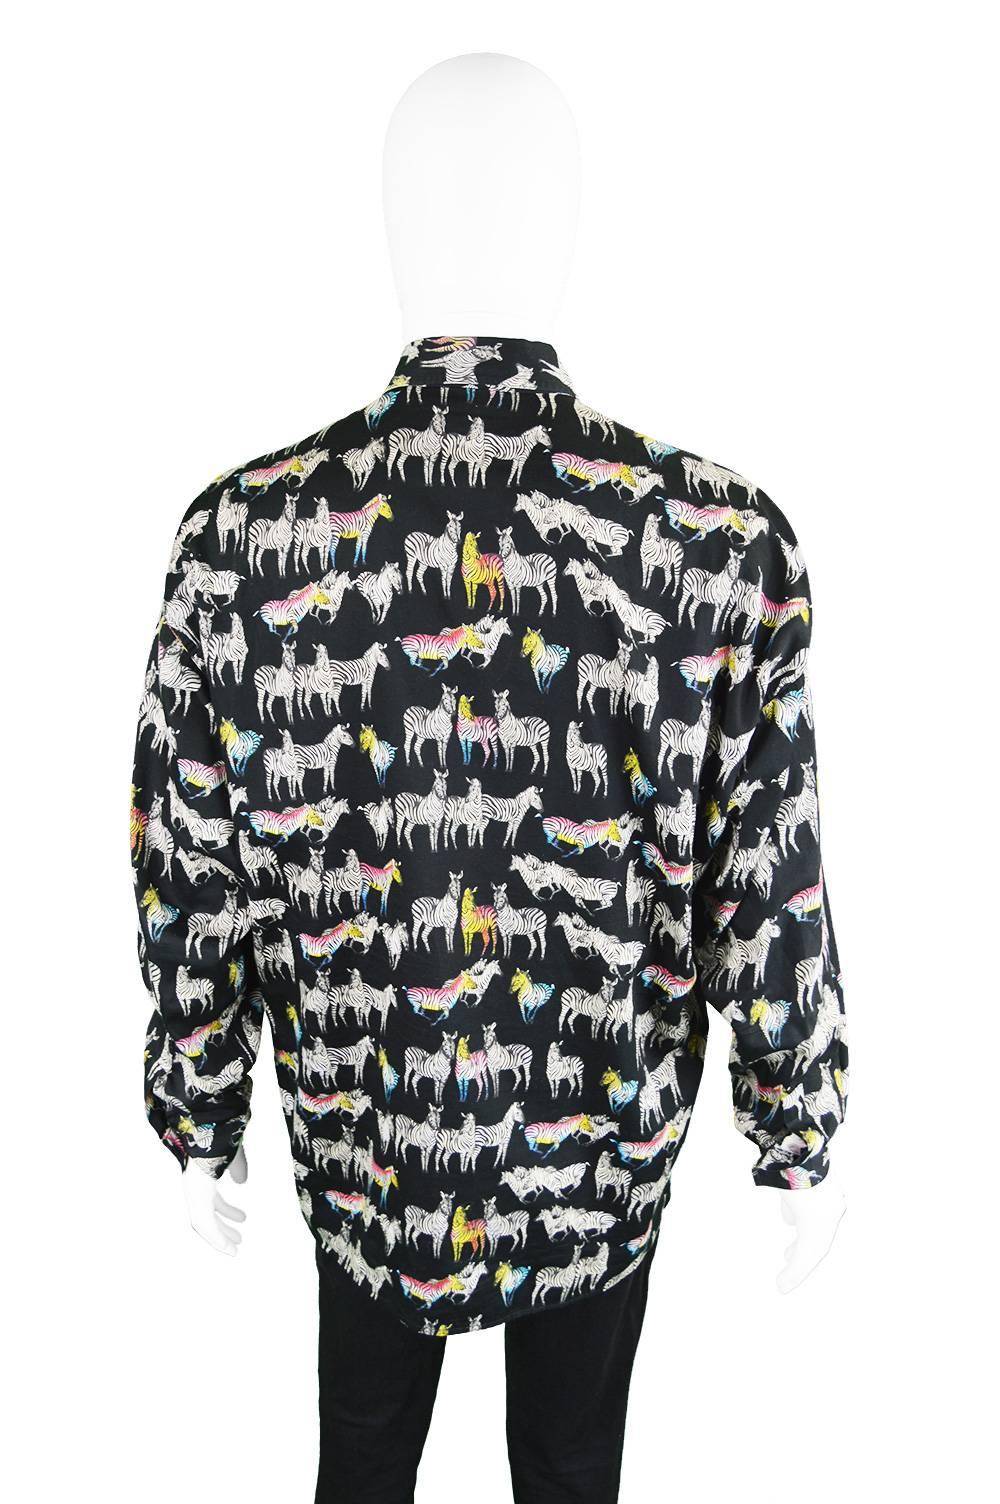 Versace Jeans Couture Rainbow Zebra Men's Cotton Shirt. Made in Italy, 1990s 1